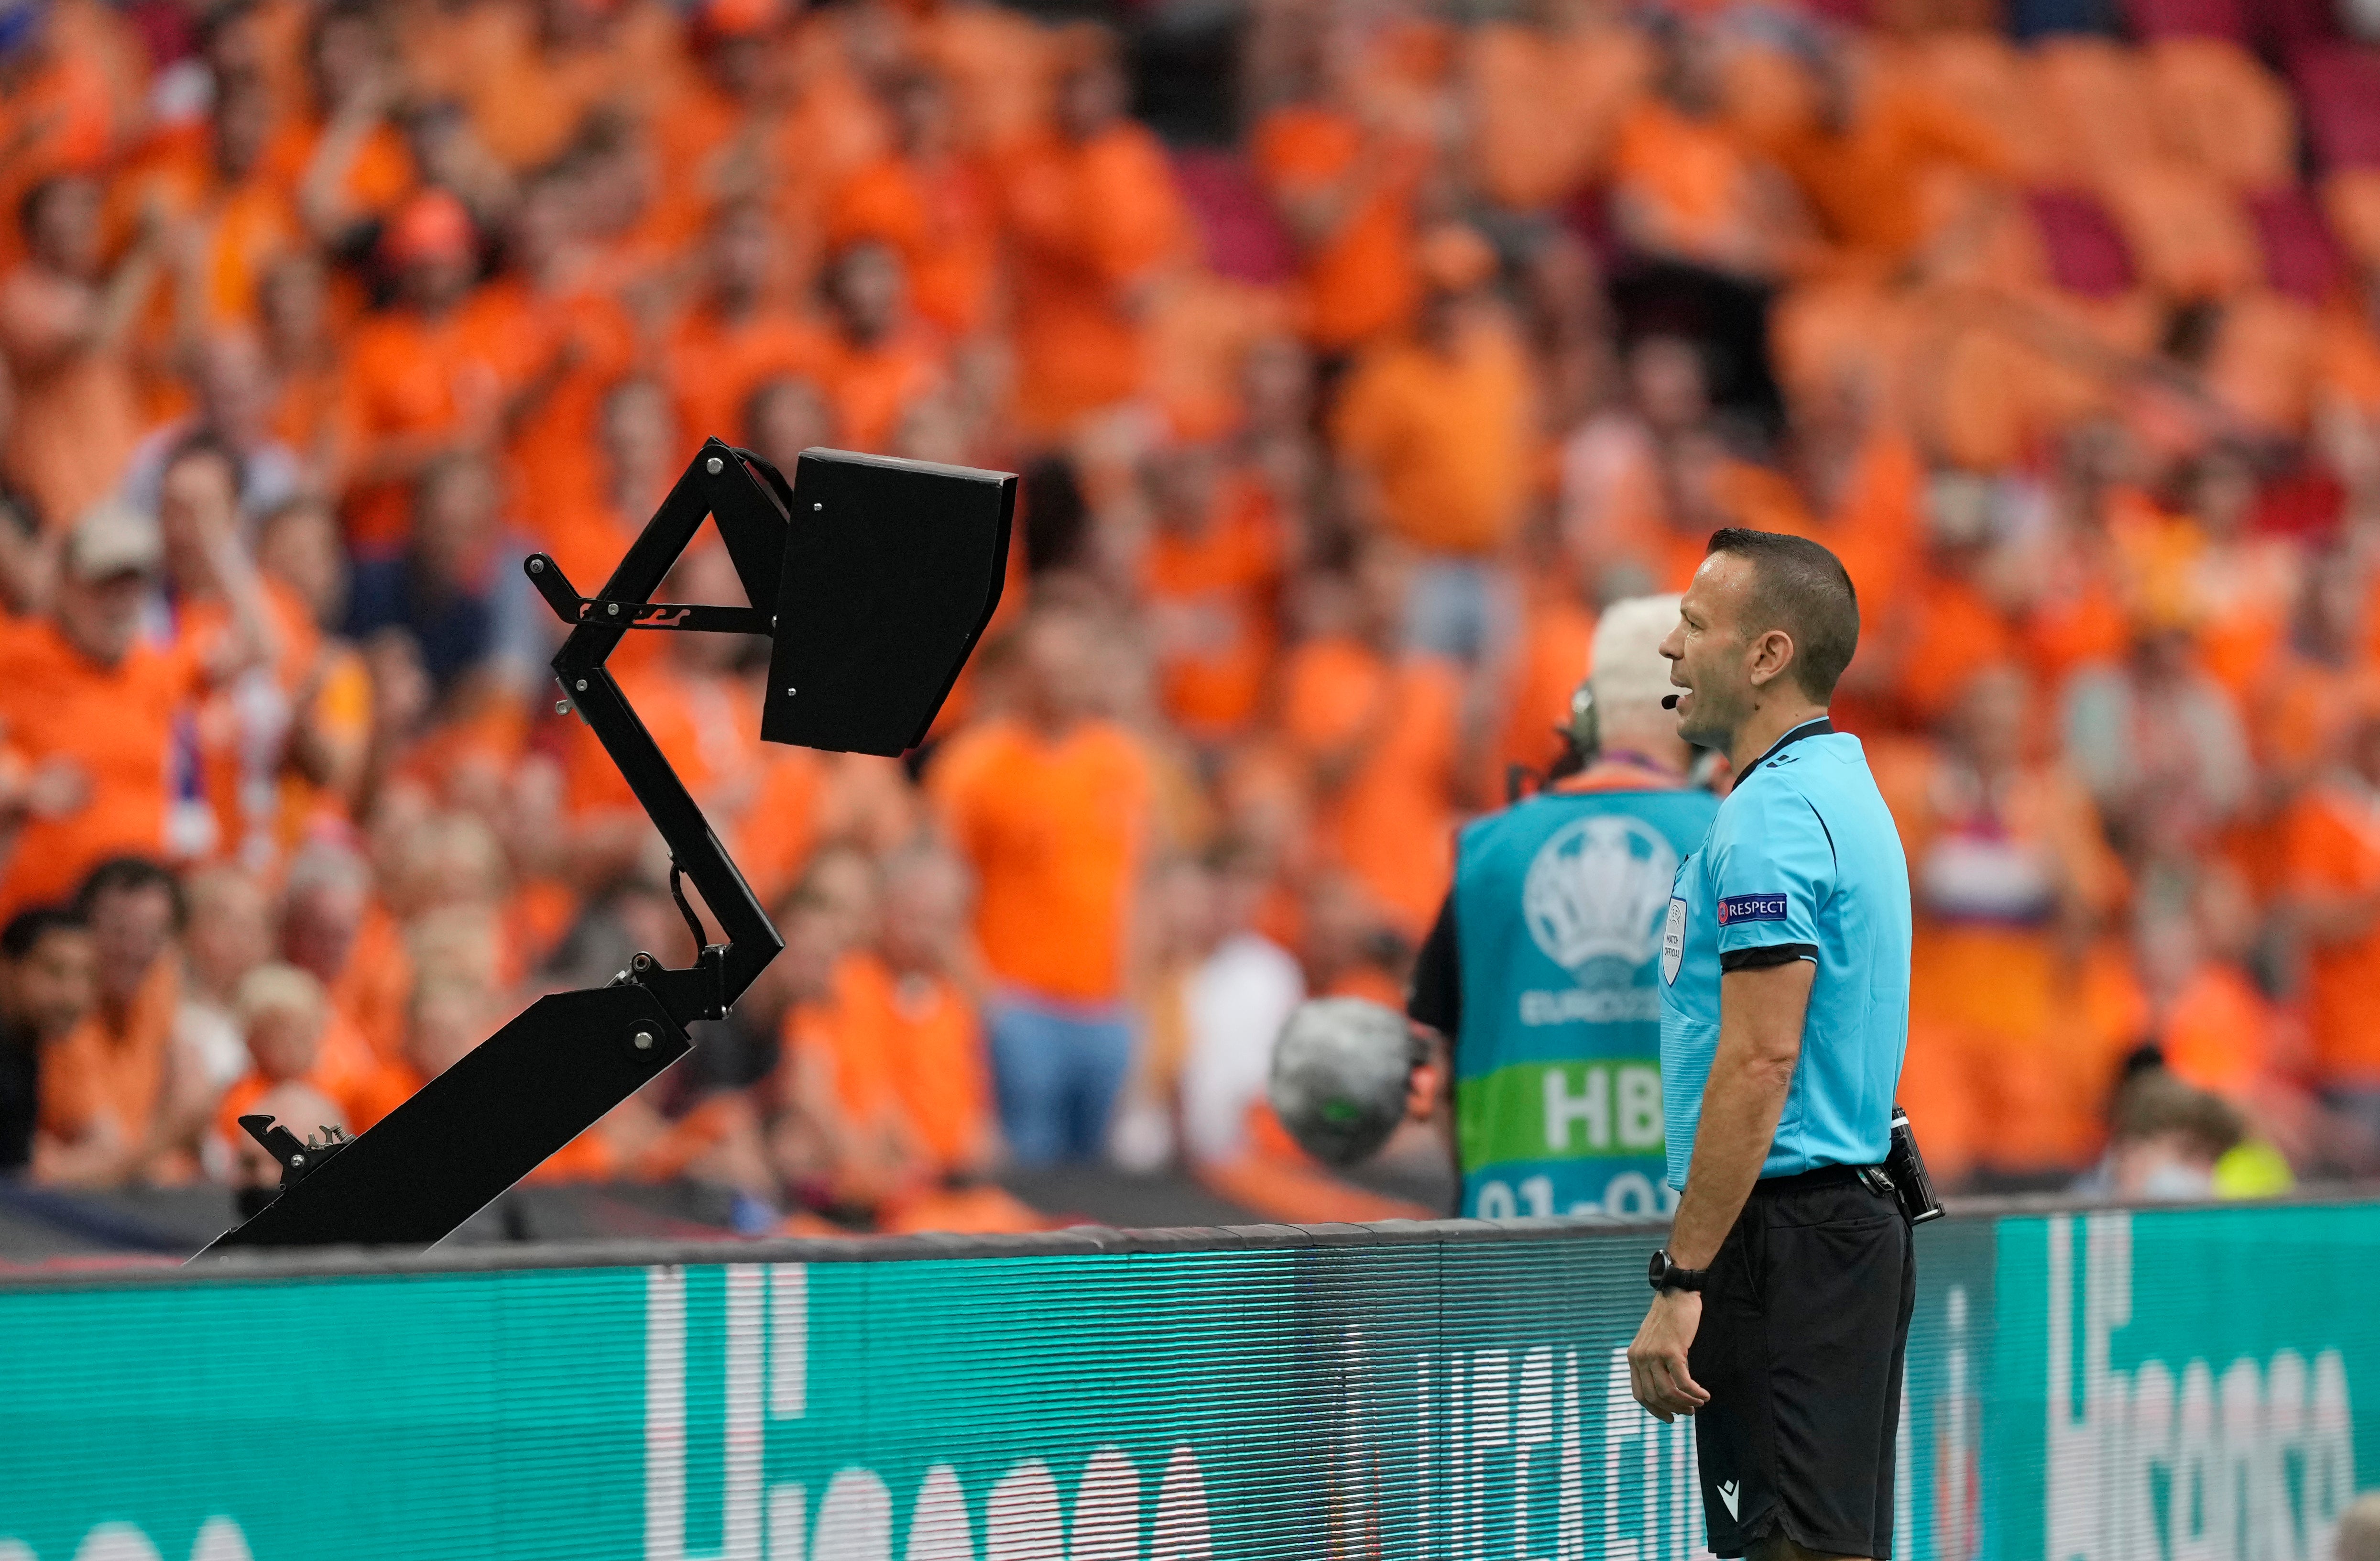 Israeli referee Orel Grinfeld checks the monitor and subsequently awards Holland a penalty against Austria